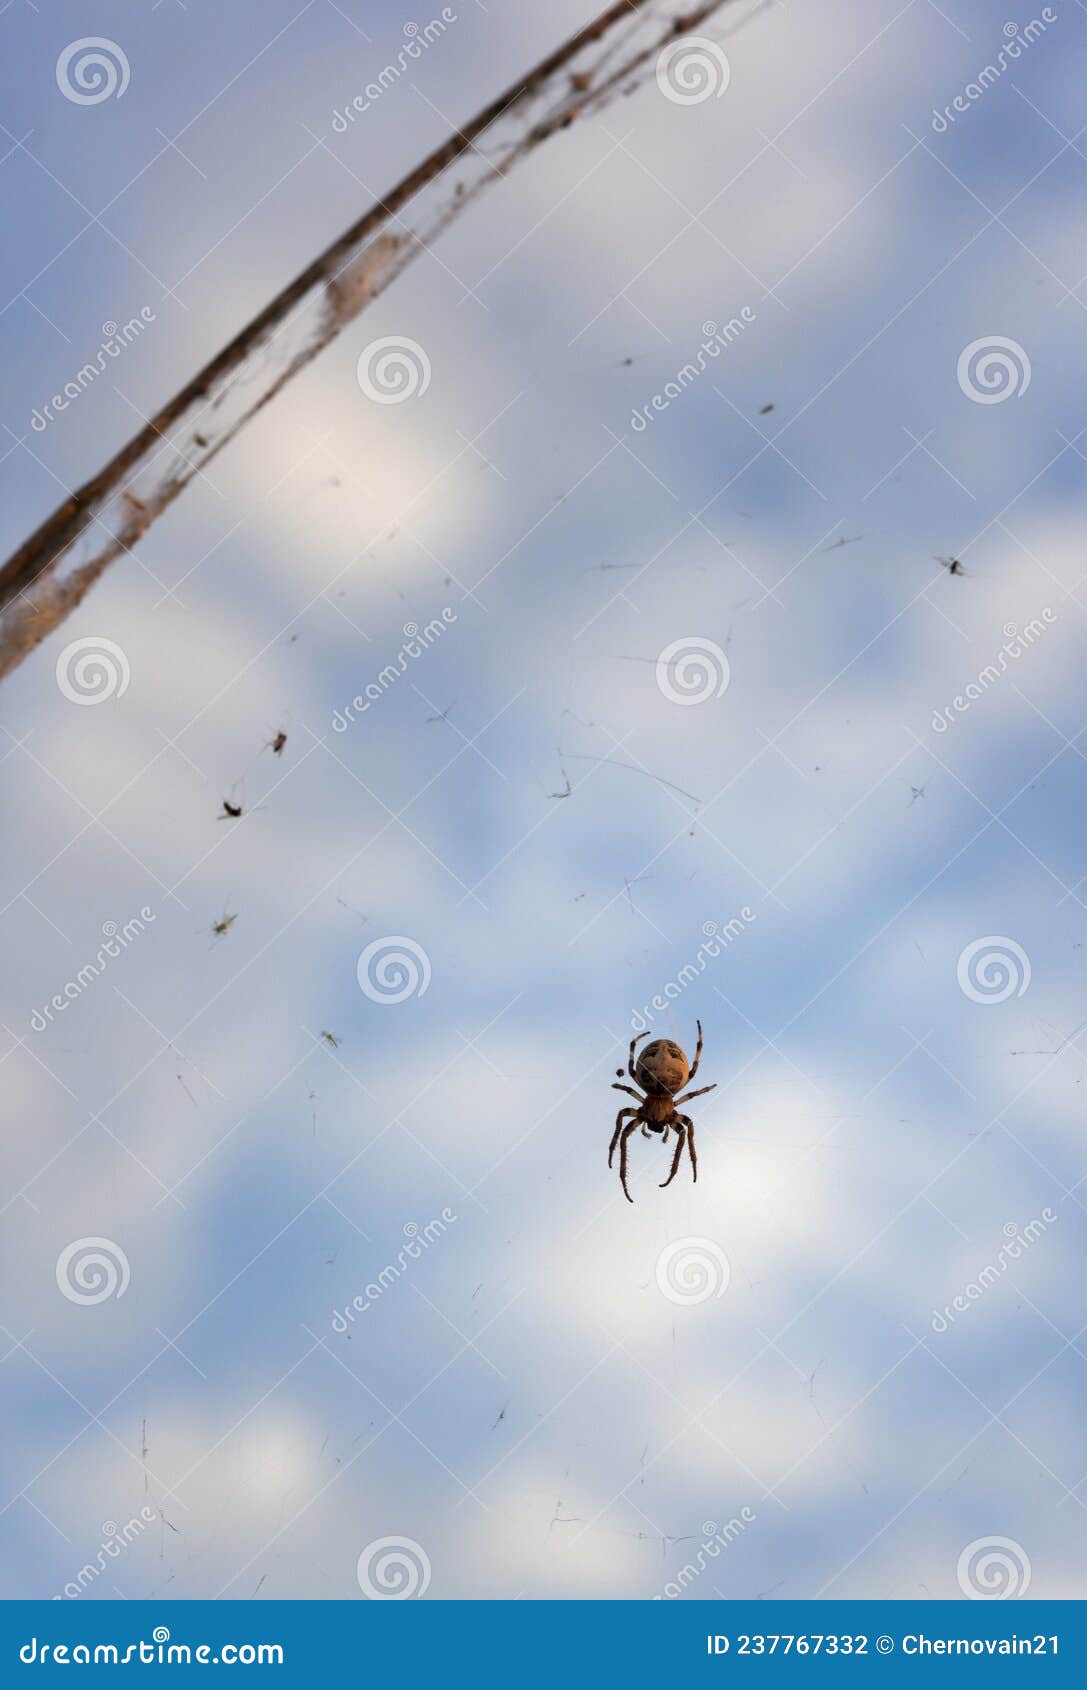 https://thumbs.dreamstime.com/z/large-spider-pattern-abdomen-sits-fishing-line-against-background-sky-close-up-large-spider-237767332.jpg